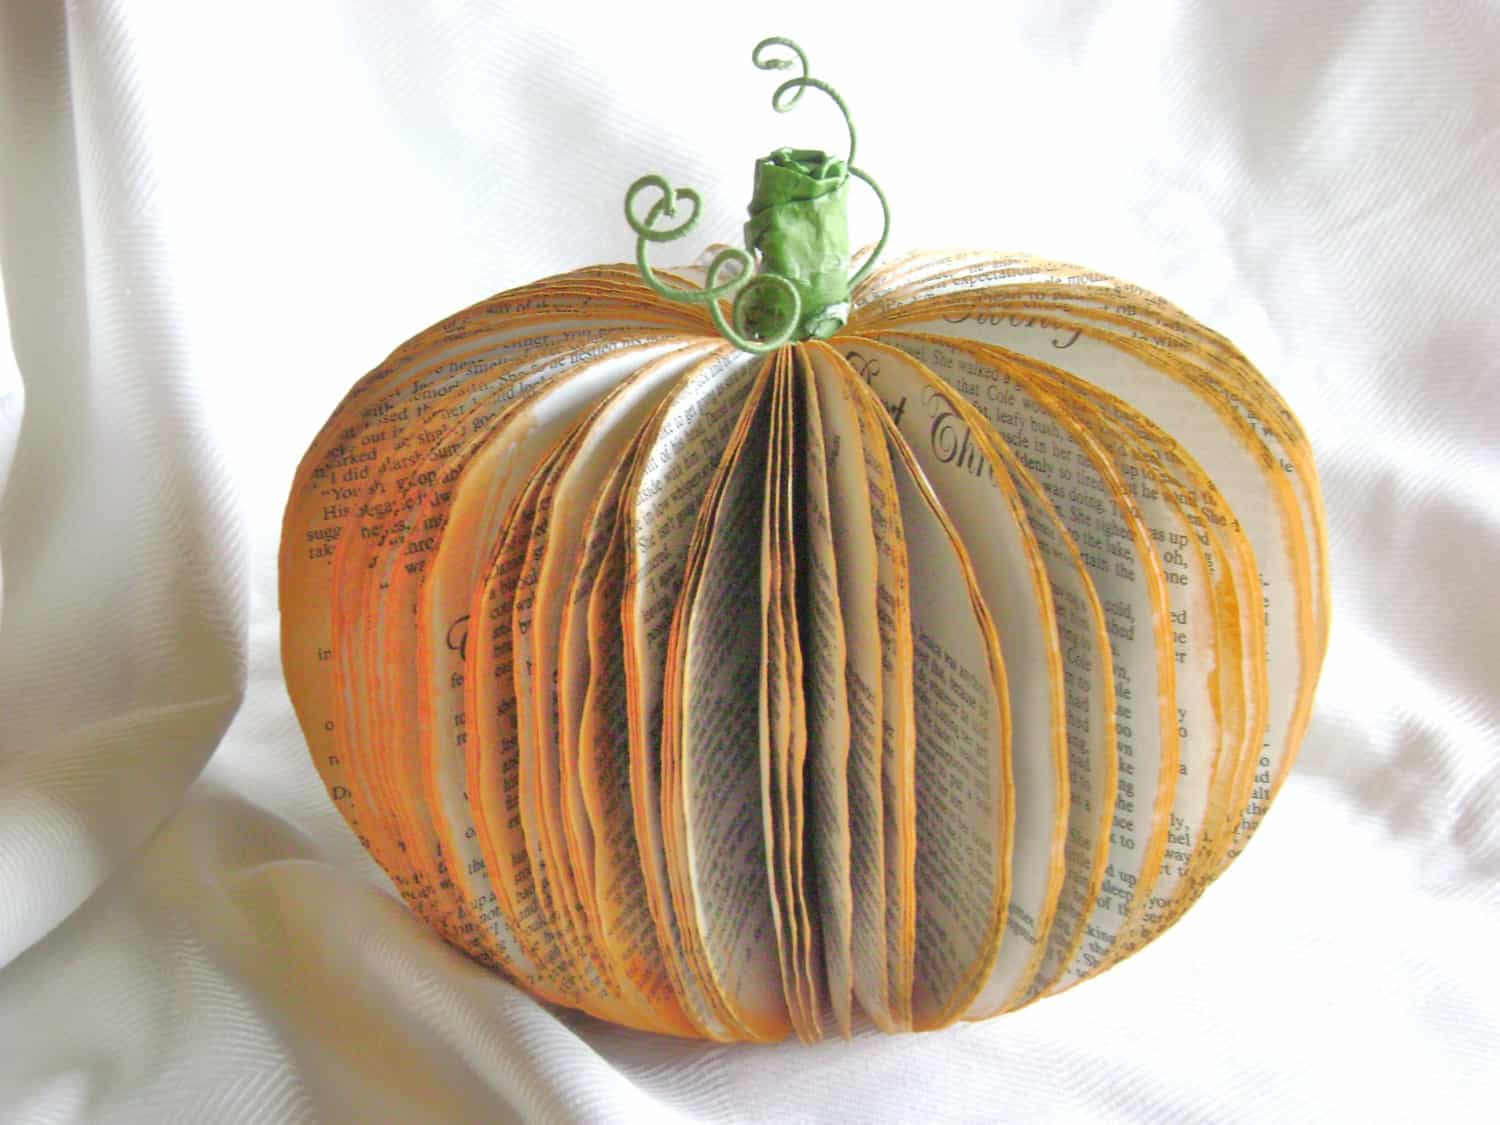 Recycled book pumpkins